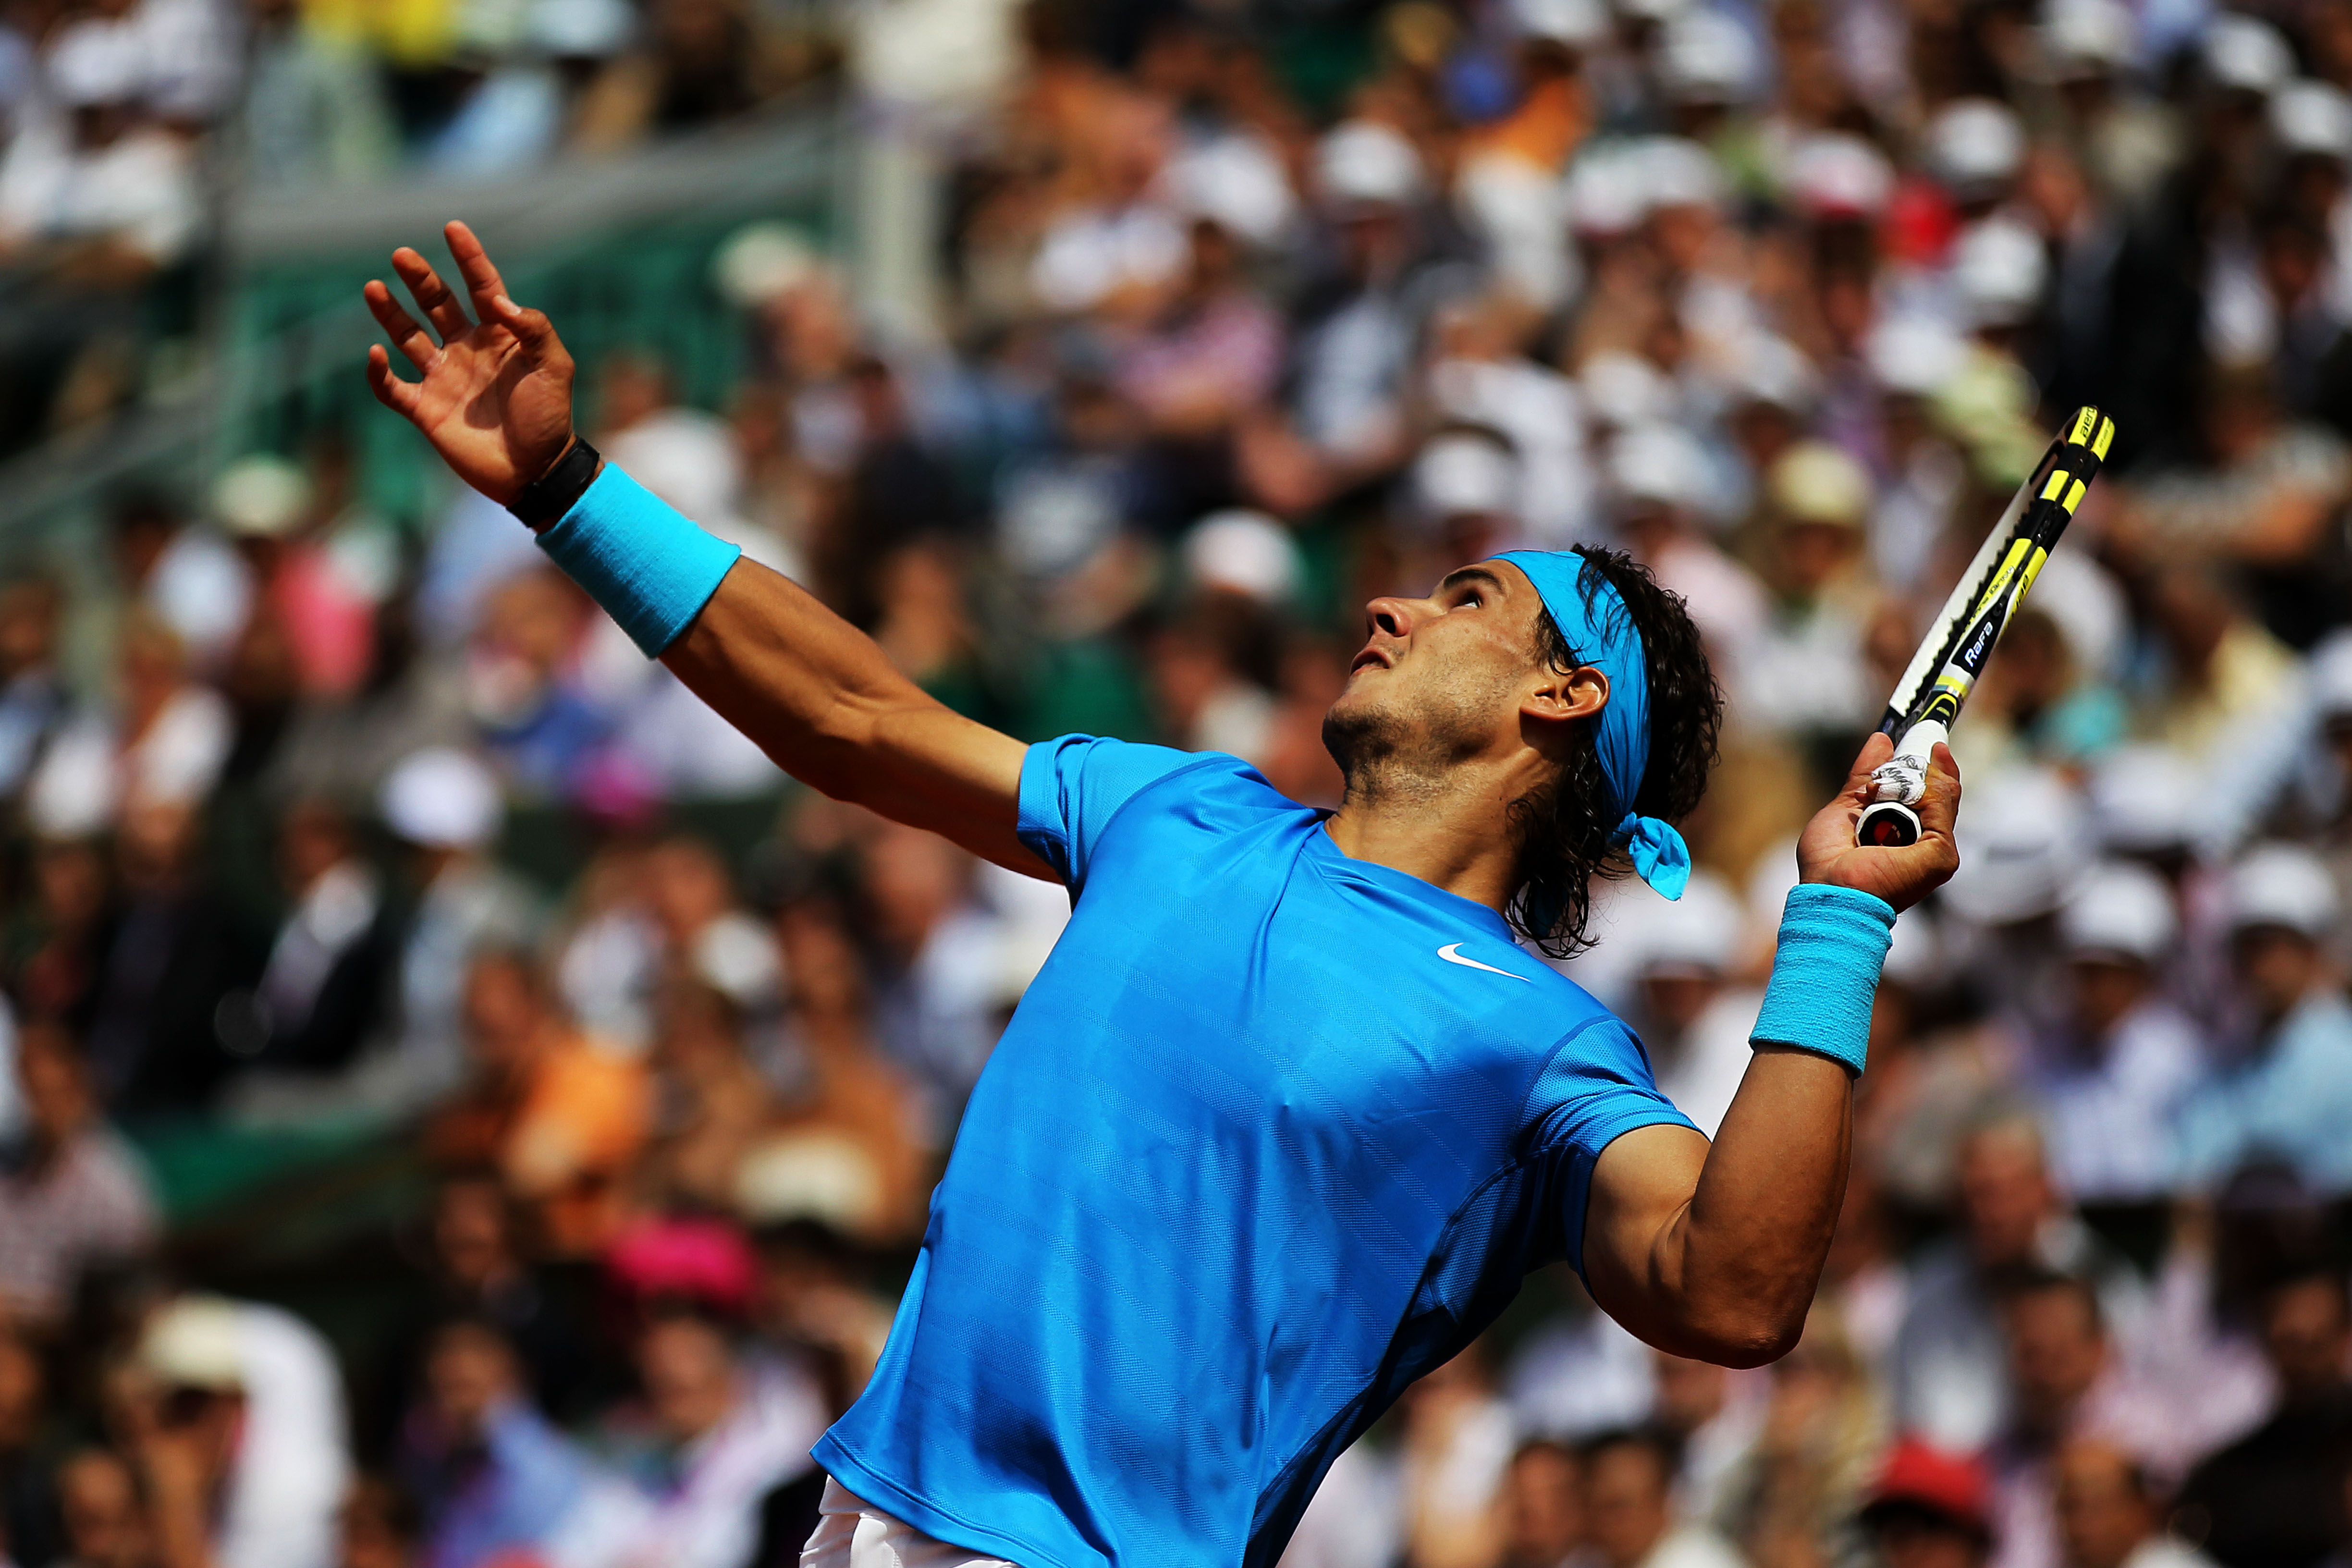 PARIS, FRANCE - MAY 24:  Rafael Nadal of Spain serves during the men's singles round one match between Rafael Nadal of Spain and John Isner of USA on day three of the French Open at Roland Garros on May 24, 2011 in Paris, France.  (Photo by Matthew Stockm